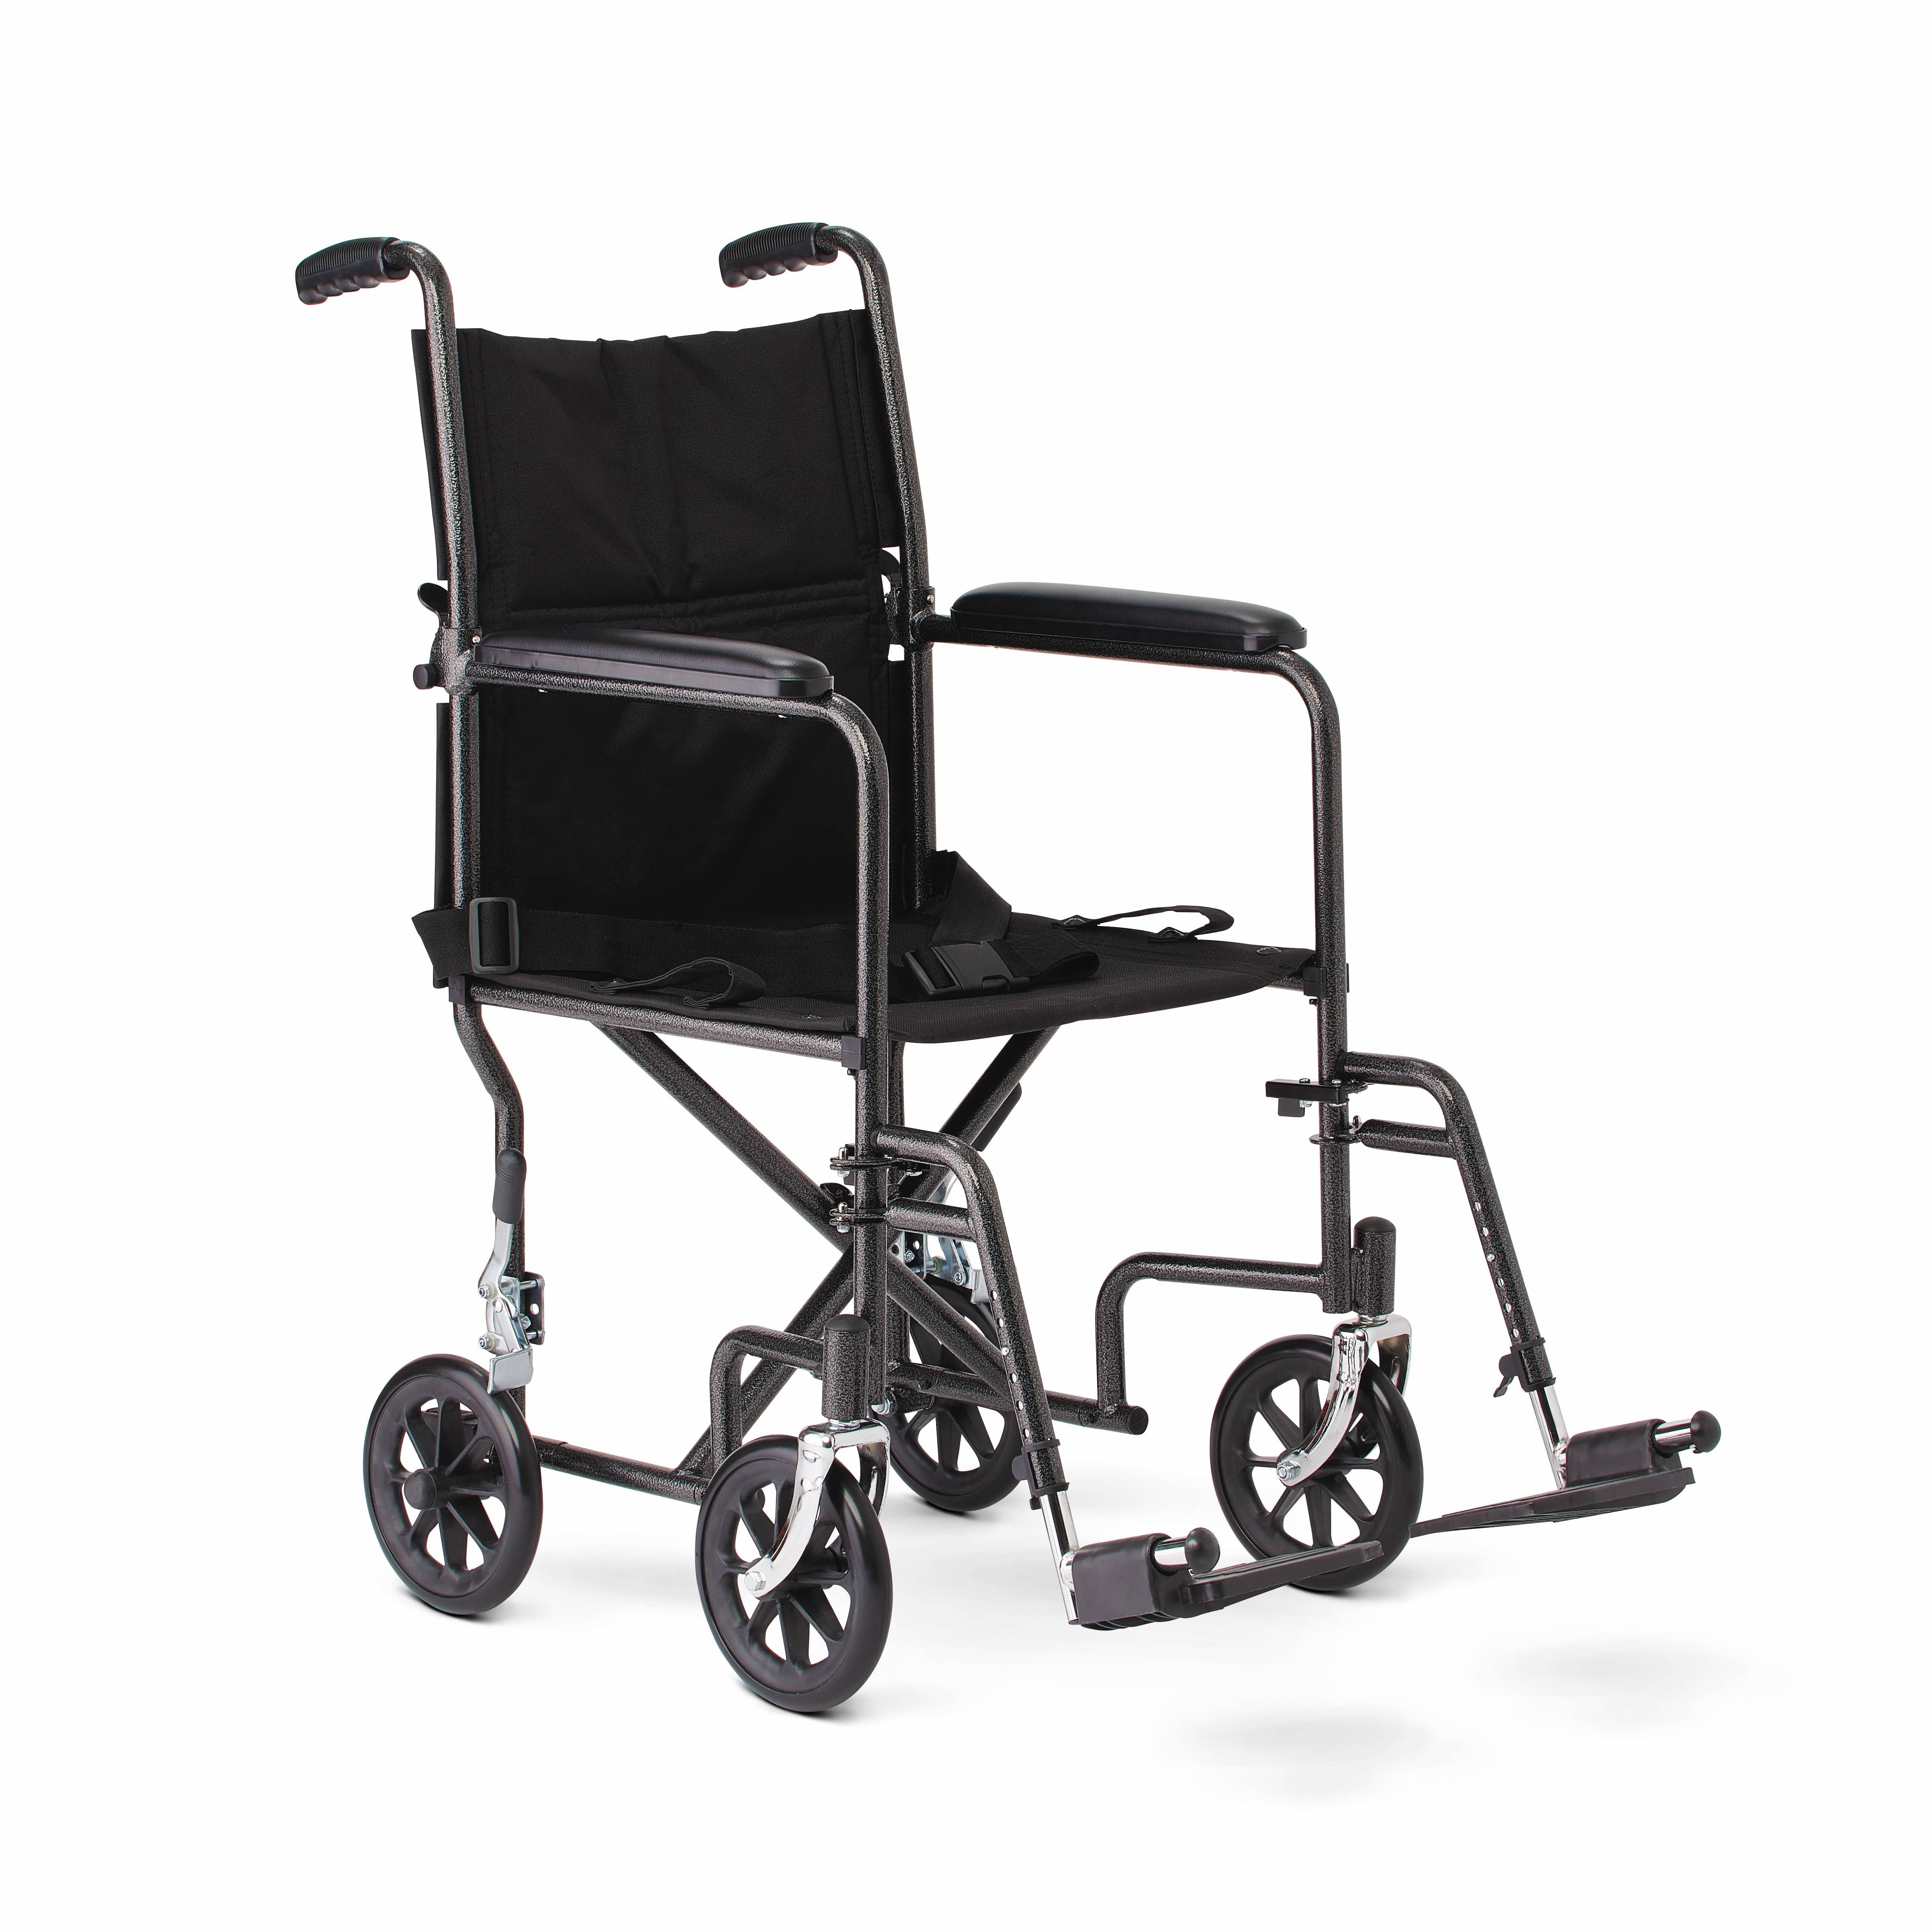 Medline Steel Transport Wheelchair, Folding Transport Chair with 8-Inch Wheels, Lightweight, Full Length Armrests and Swing Away Footrests, 19-Inch Wi